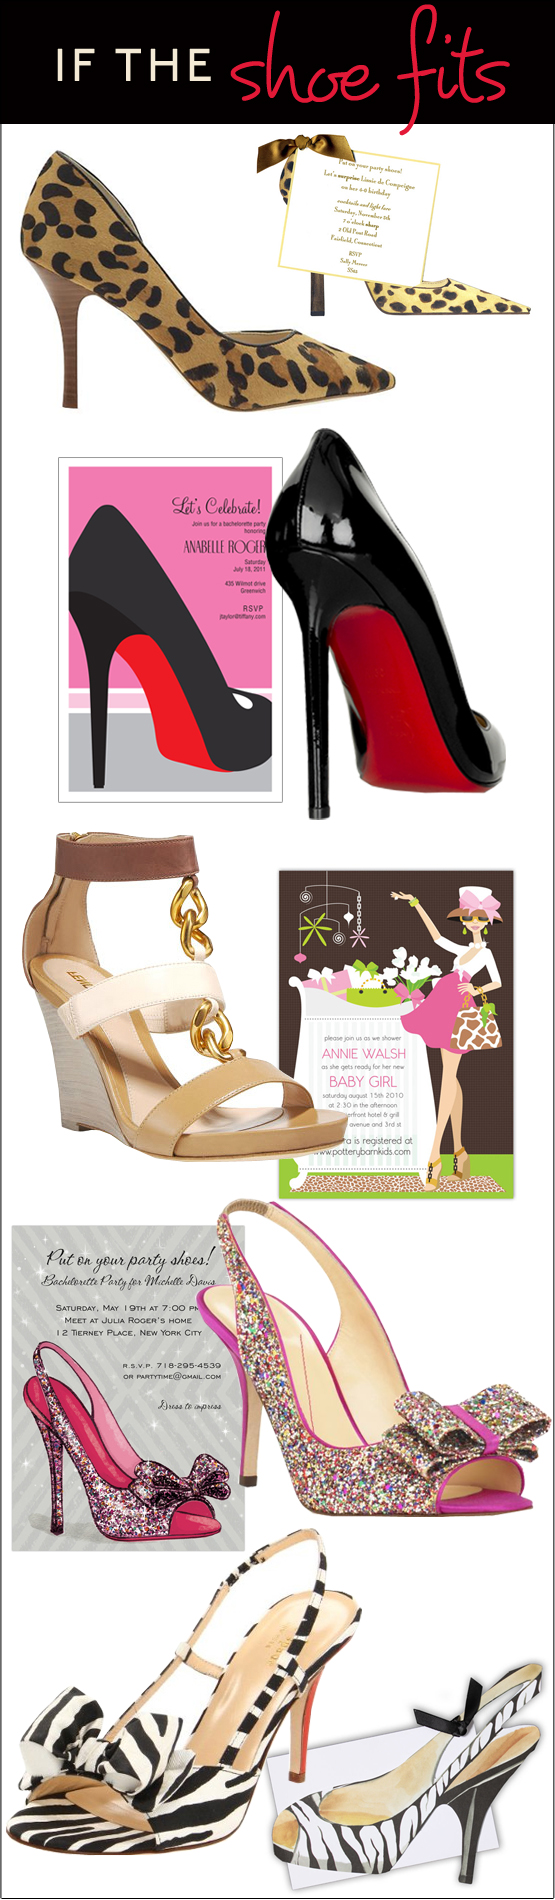 ShoeInspired2 Our Favorite Shoe-Inspired Invites